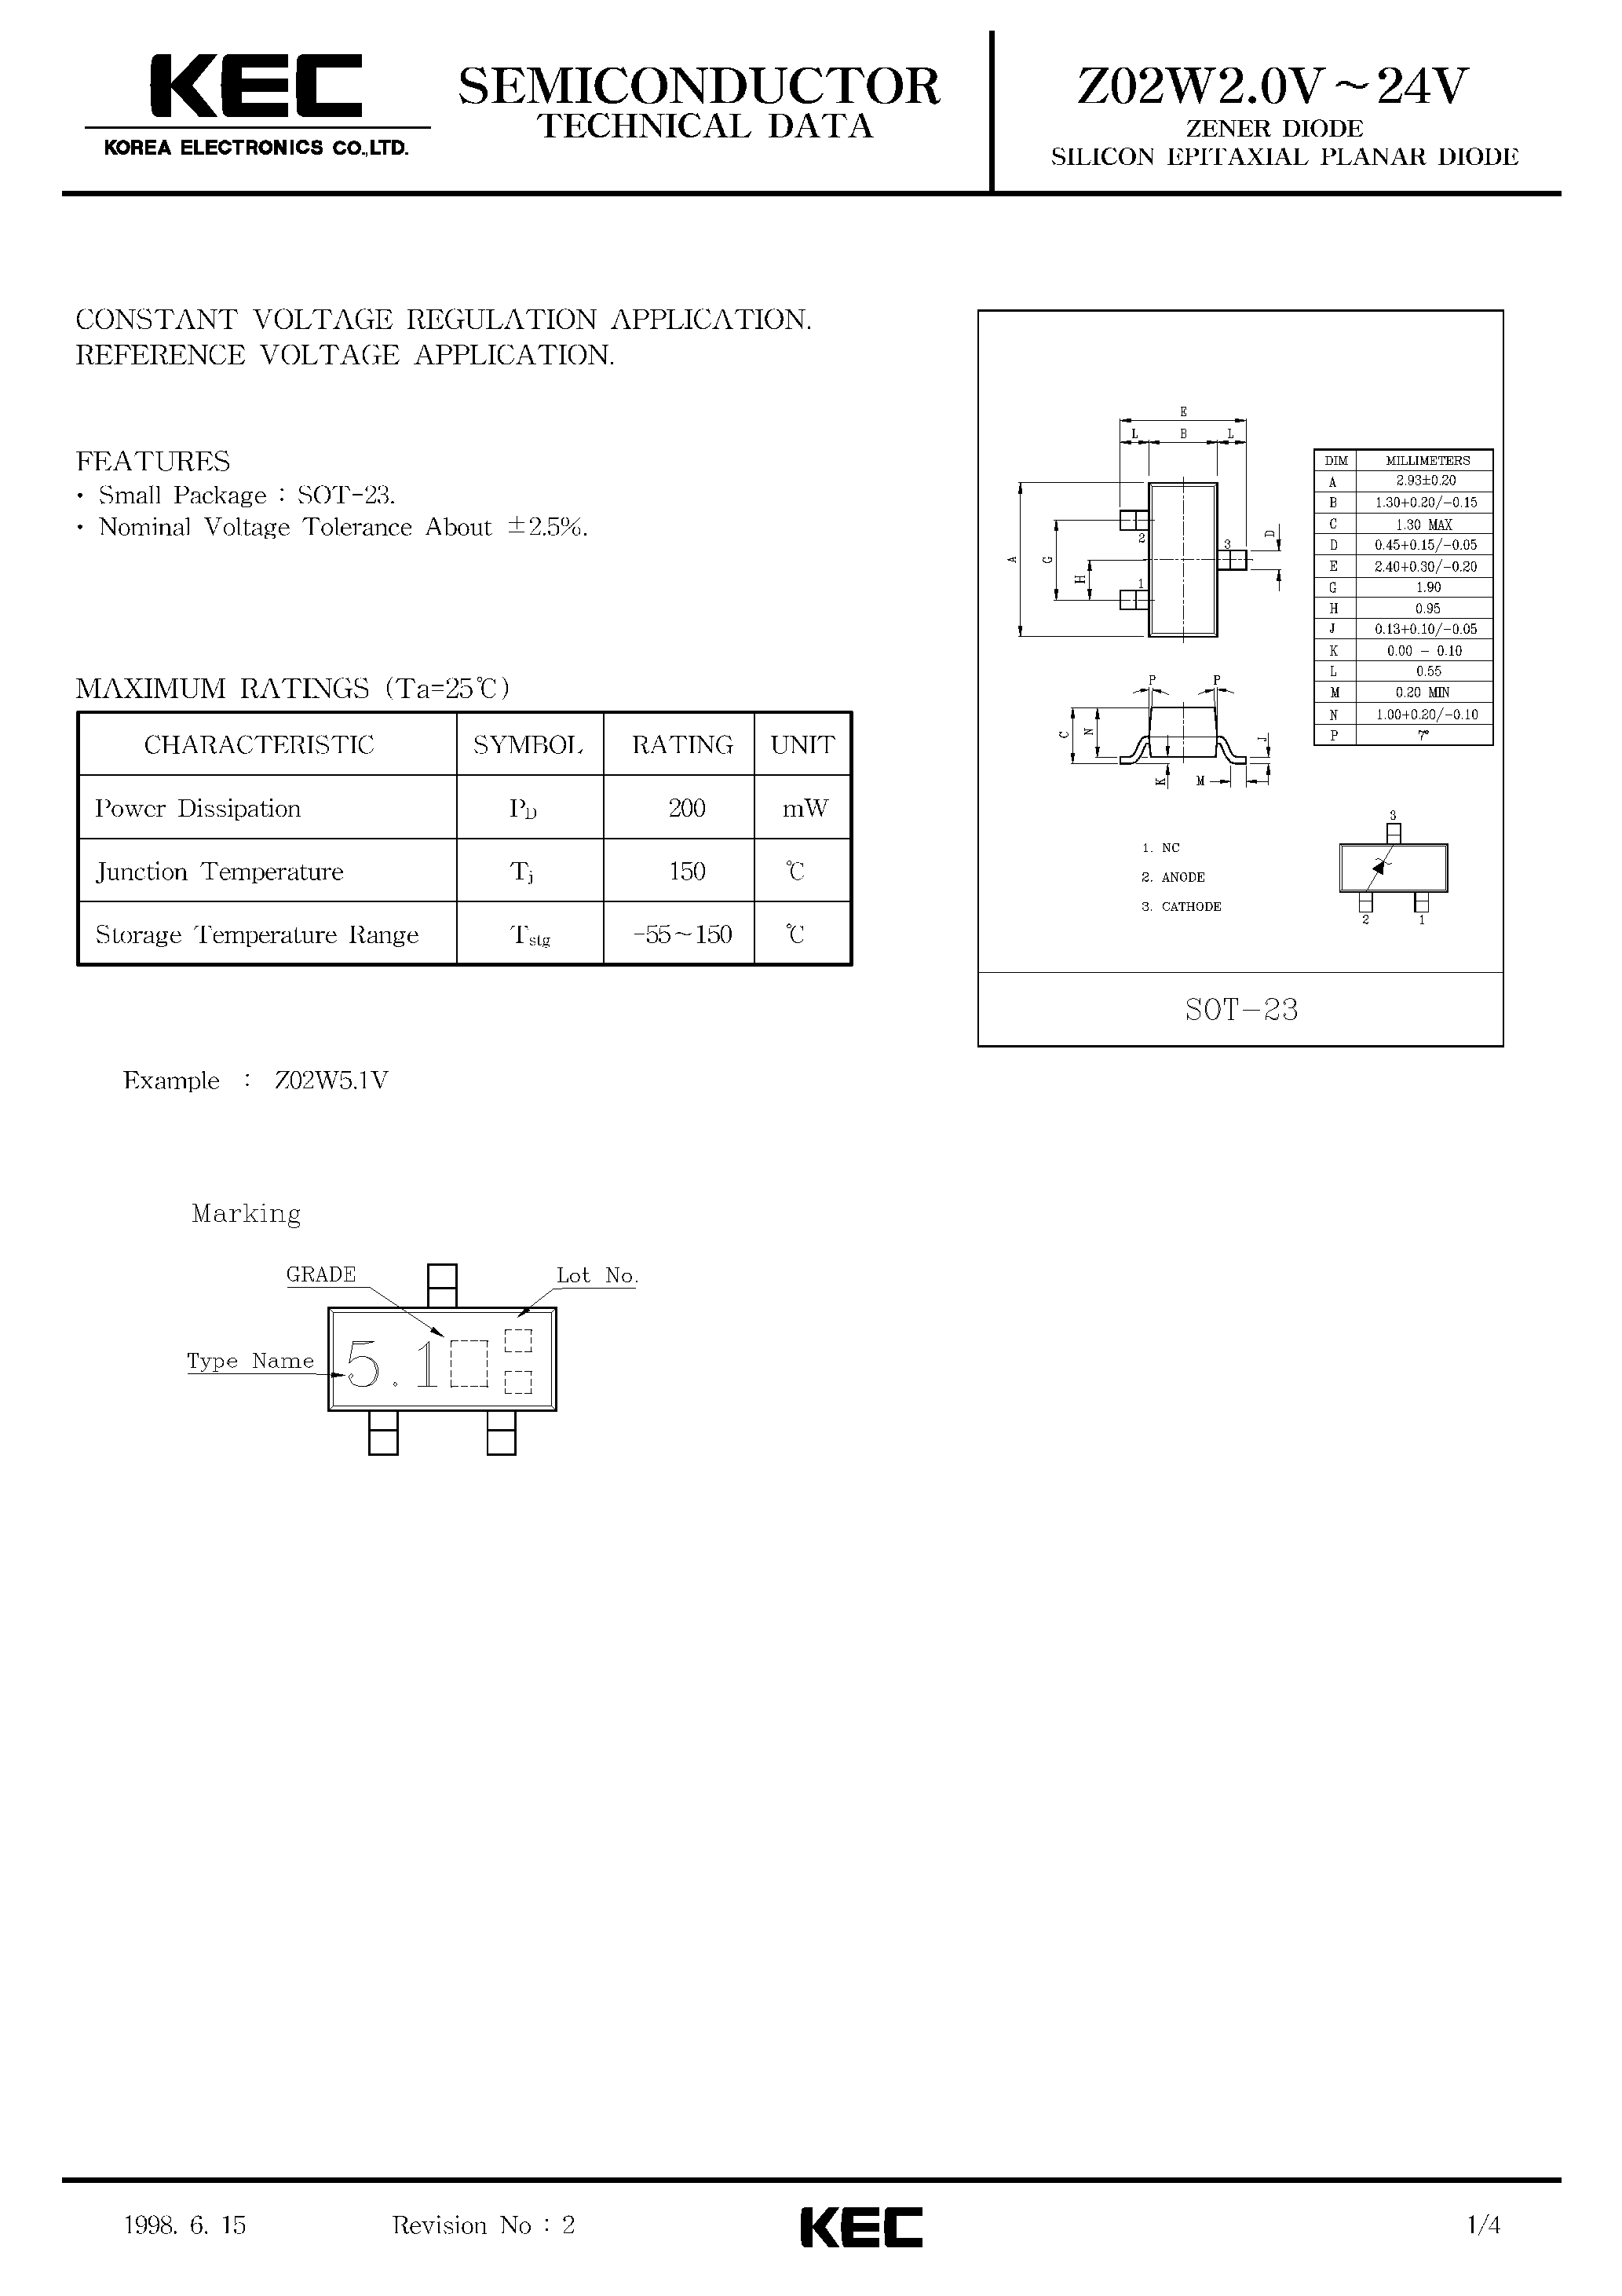 Datasheet Z02W3.6V - ZENER DIODE SILICON EPITAXIAL PLANAR DIODE page 1